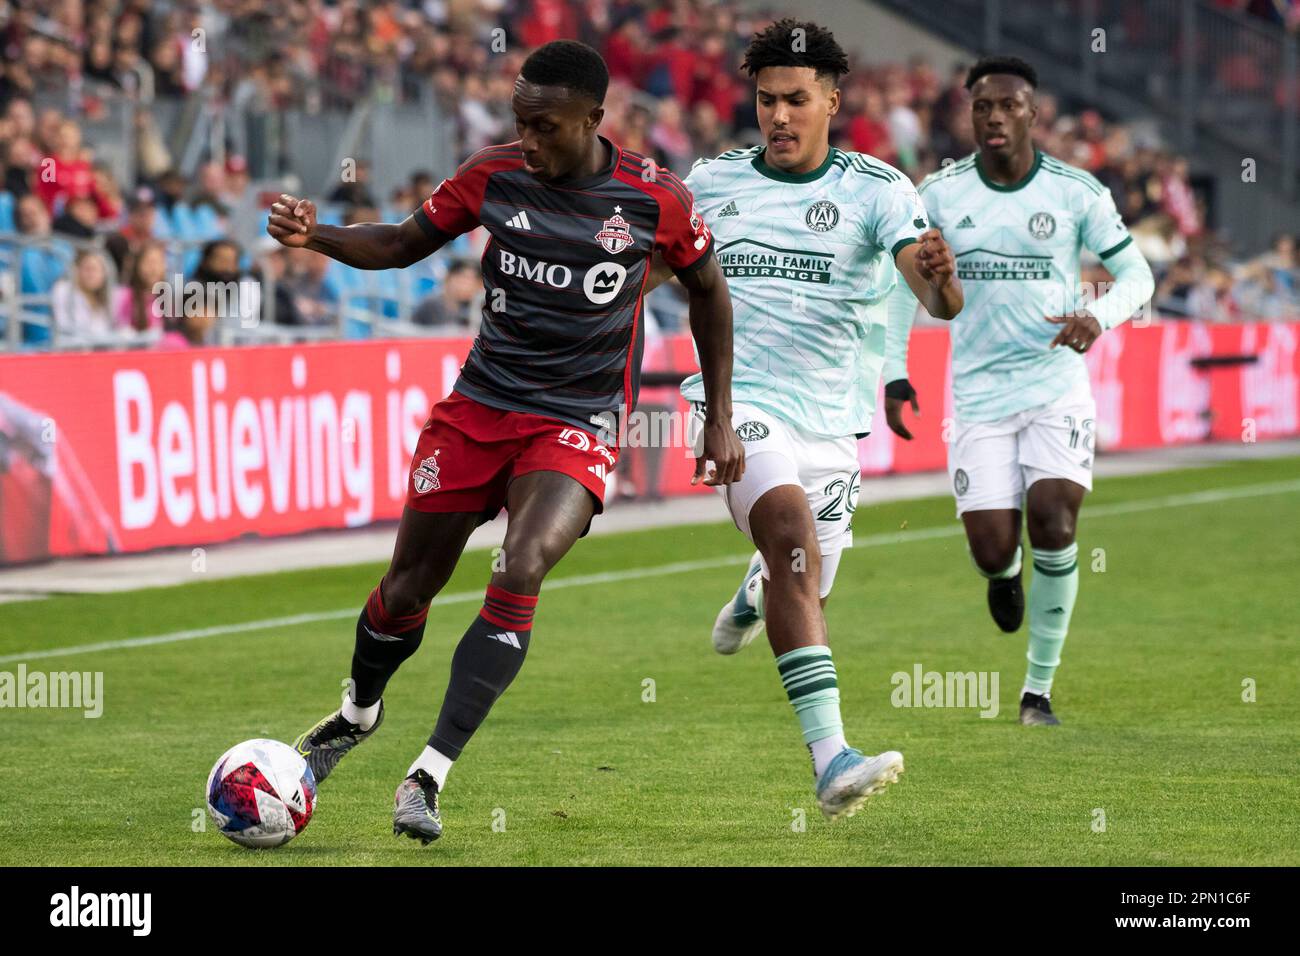 Toronto, Canada. 15th Apr, 2023. Richie Laryea #22 (L) and Caleb Wiley #26 (R) in action during the MLS game between Toronto FC and Atlanta United at BMO field. The game ended 2-2. Credit: SOPA Images Limited/Alamy Live News Stock Photo